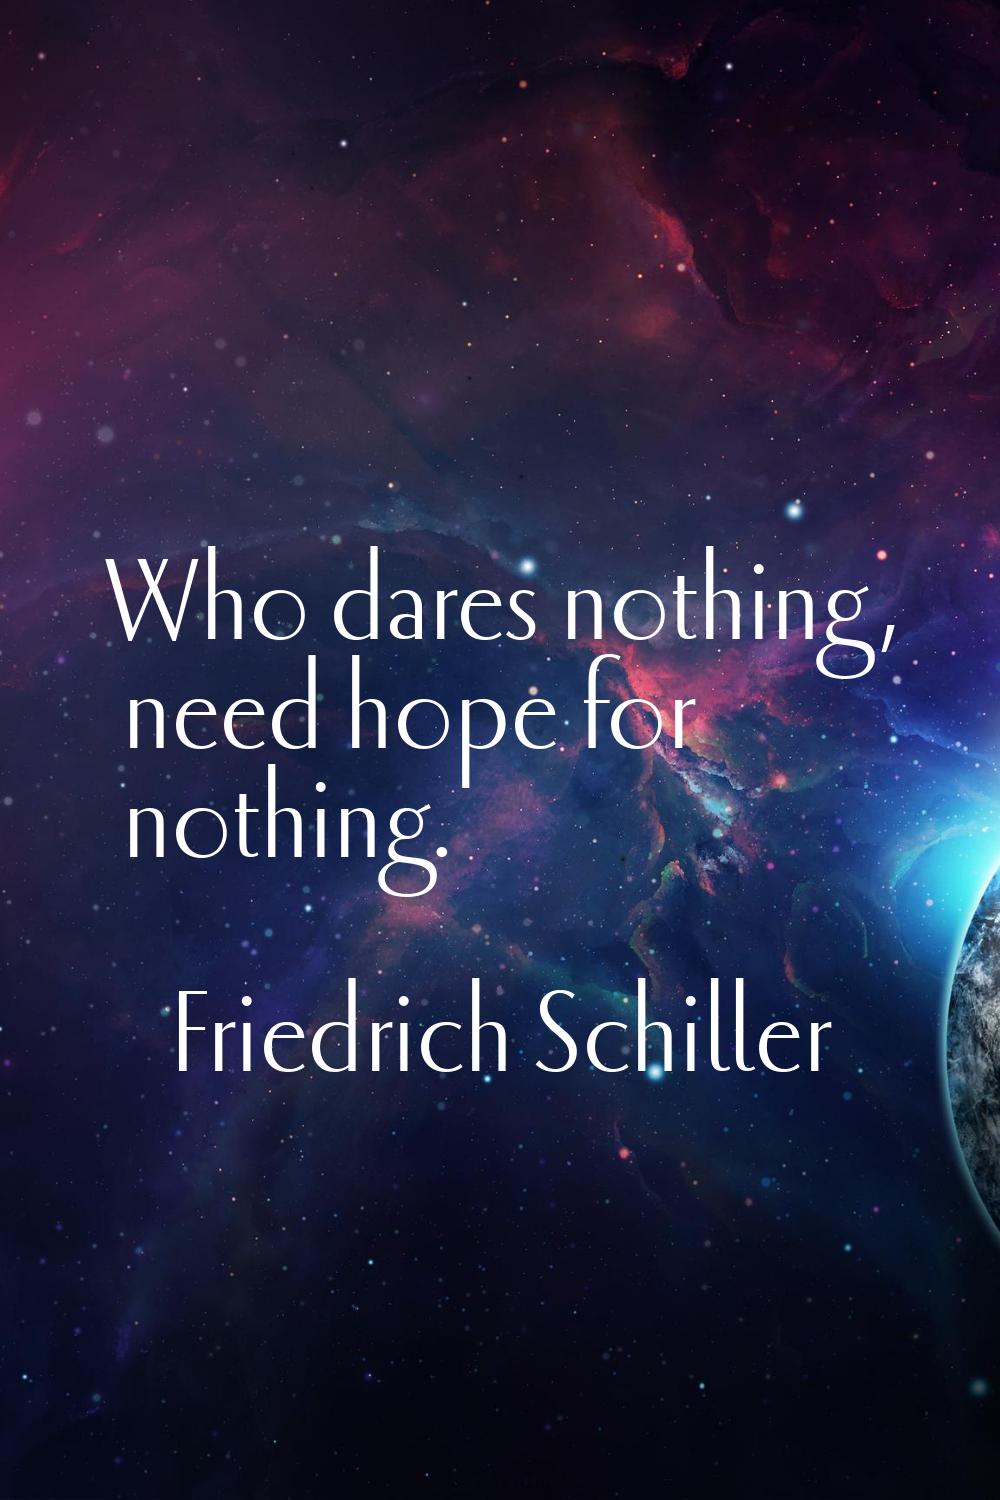 Who dares nothing, need hope for nothing.